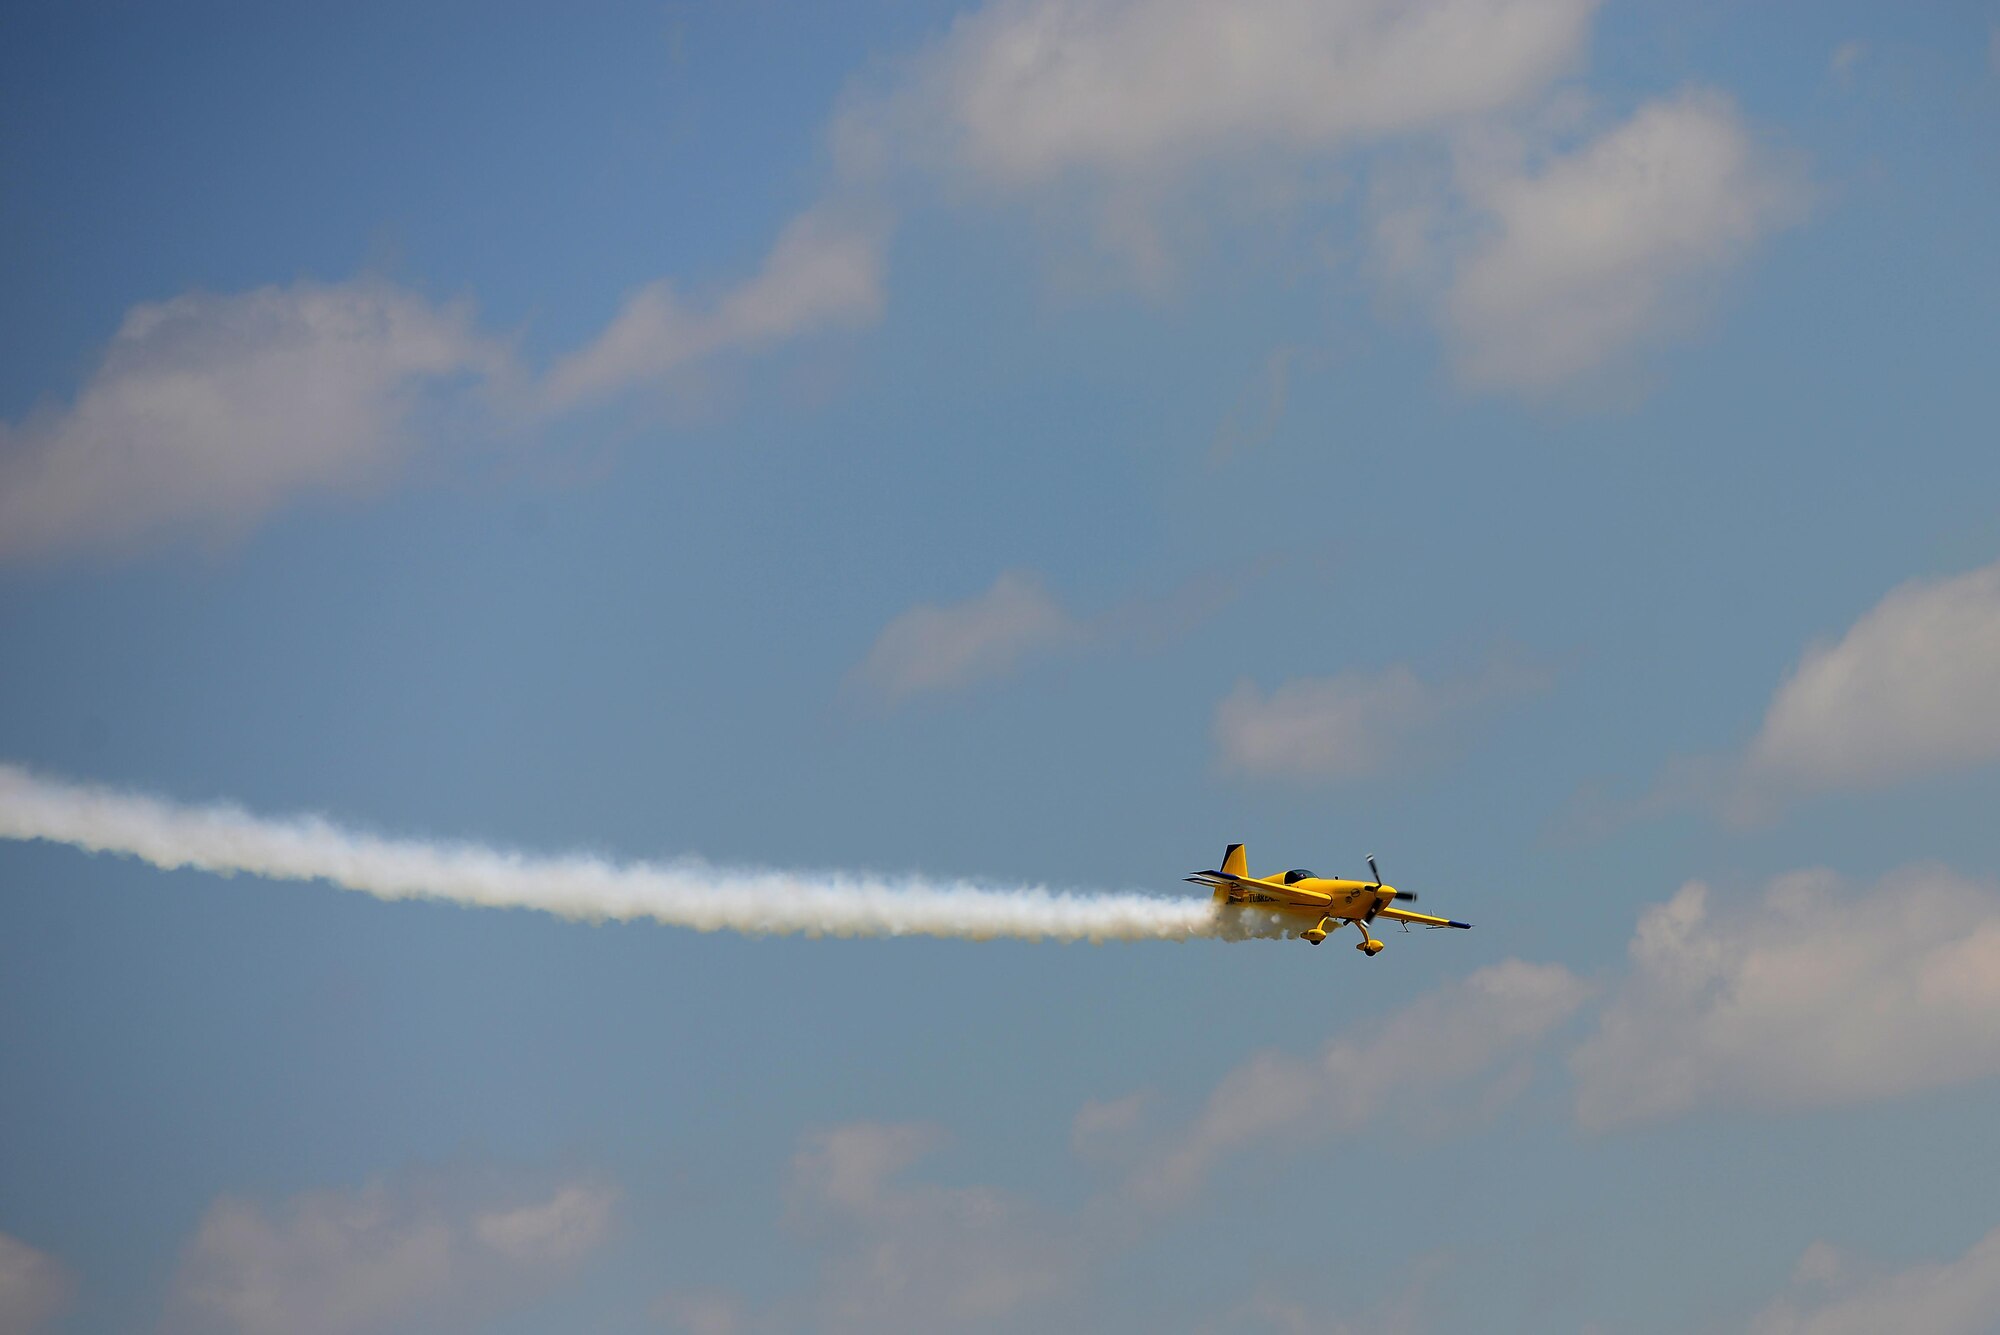 Kevin Coleman performs during the 100th Centennial Celebration Air Show, June 10, 2017, at Scott Air Force Base, Ill. Kevin has accumulated more than 2500 hours of flying time. He has been recognized as the highest placing contender at the 2007 Aerobatic Championship, and the next year clinched third place at the same event. He is contracted to perform year-round in the air show circuit across the country, and in 2015, a lifetime of practice paid off when he earned a position on the U.S. Advanced Aerobatic Team – the Olympics of aviation. (U.S. Air Force photo by Tech. Sgt. Jonathan Fowler)